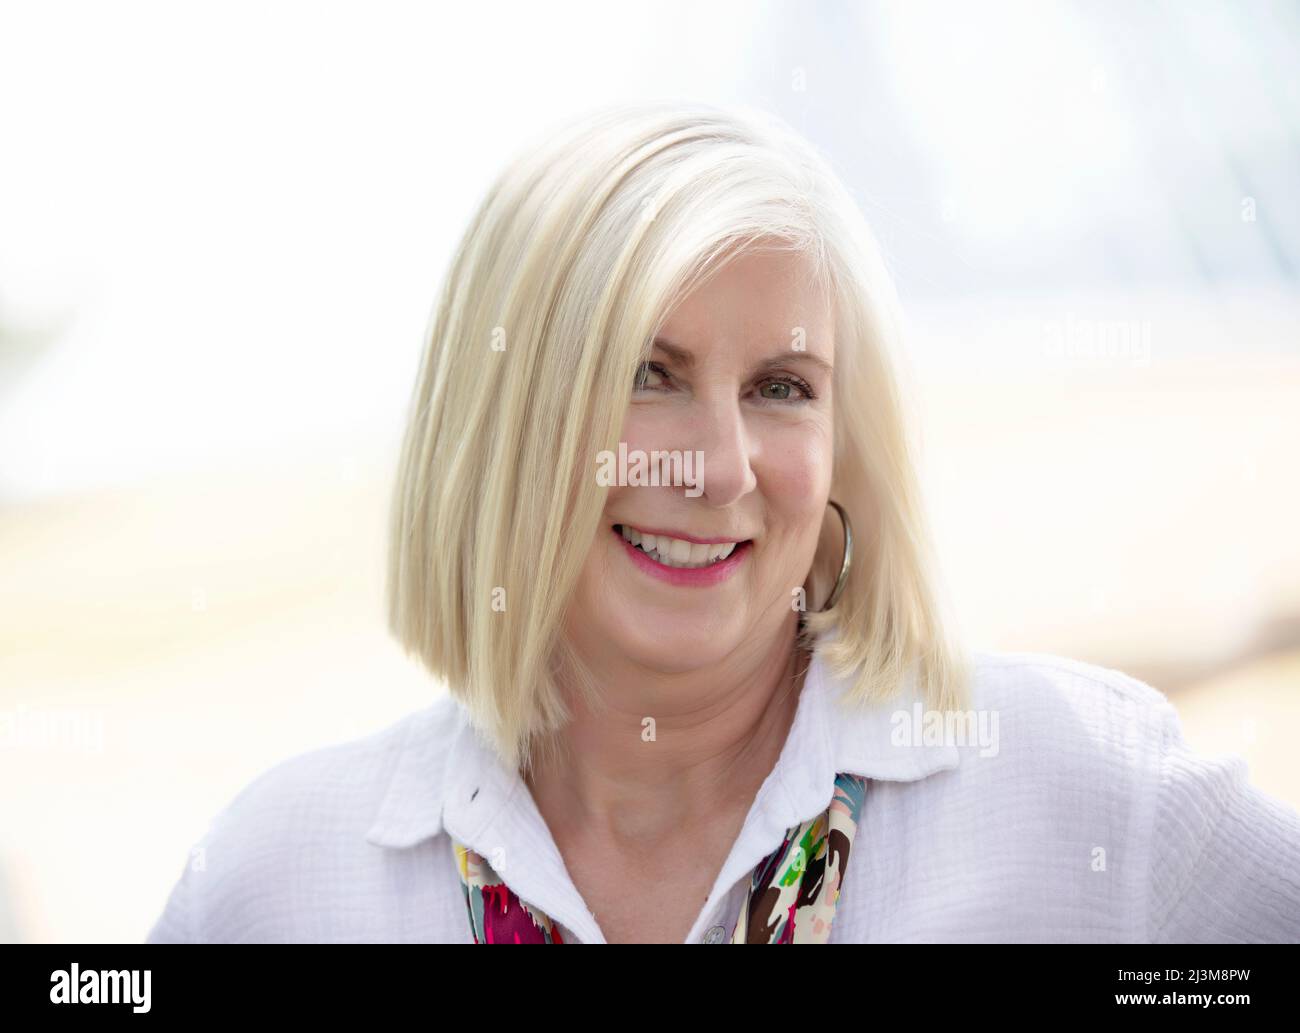 Close-up portrait of a mature woman with white hair; Edmonton, Alberta, Canada Stock Photo